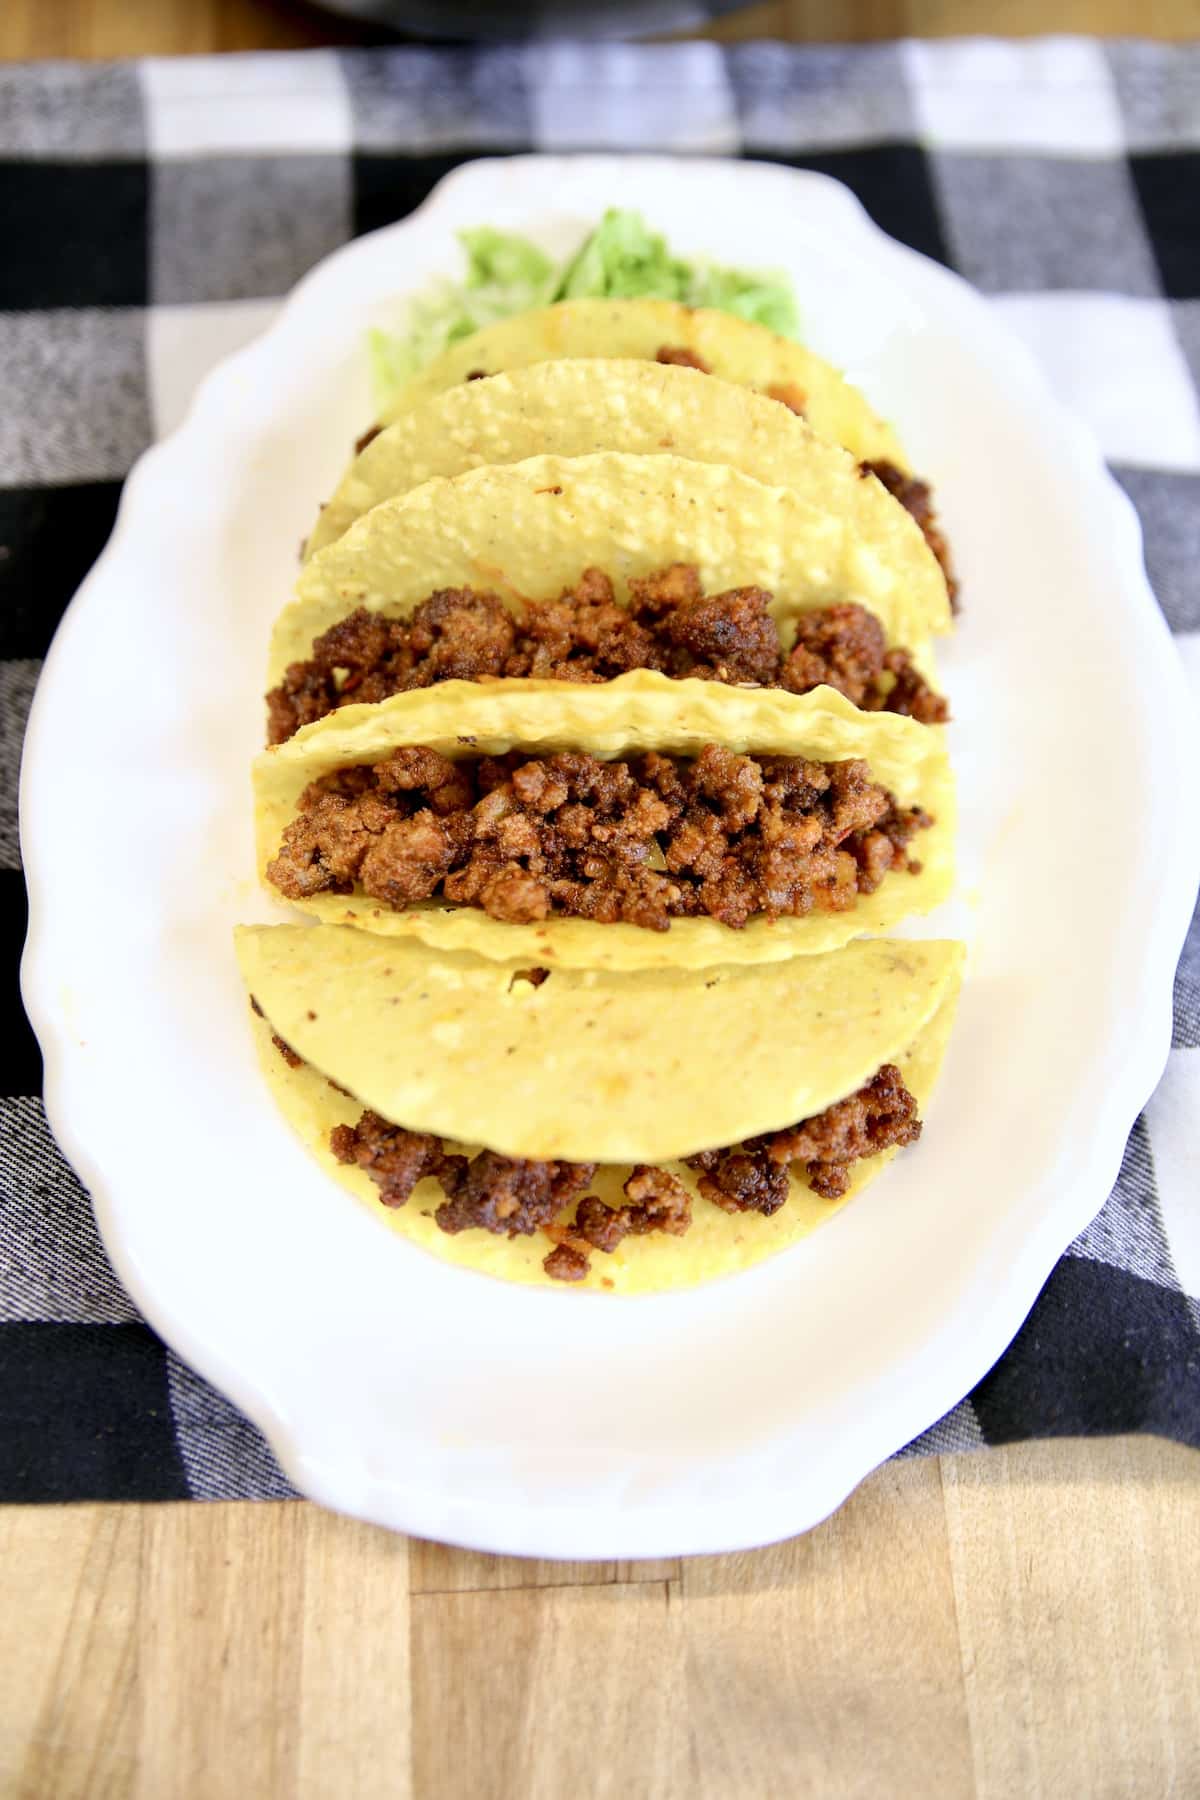 Crispy taco shells filled with seasoned ground beef.